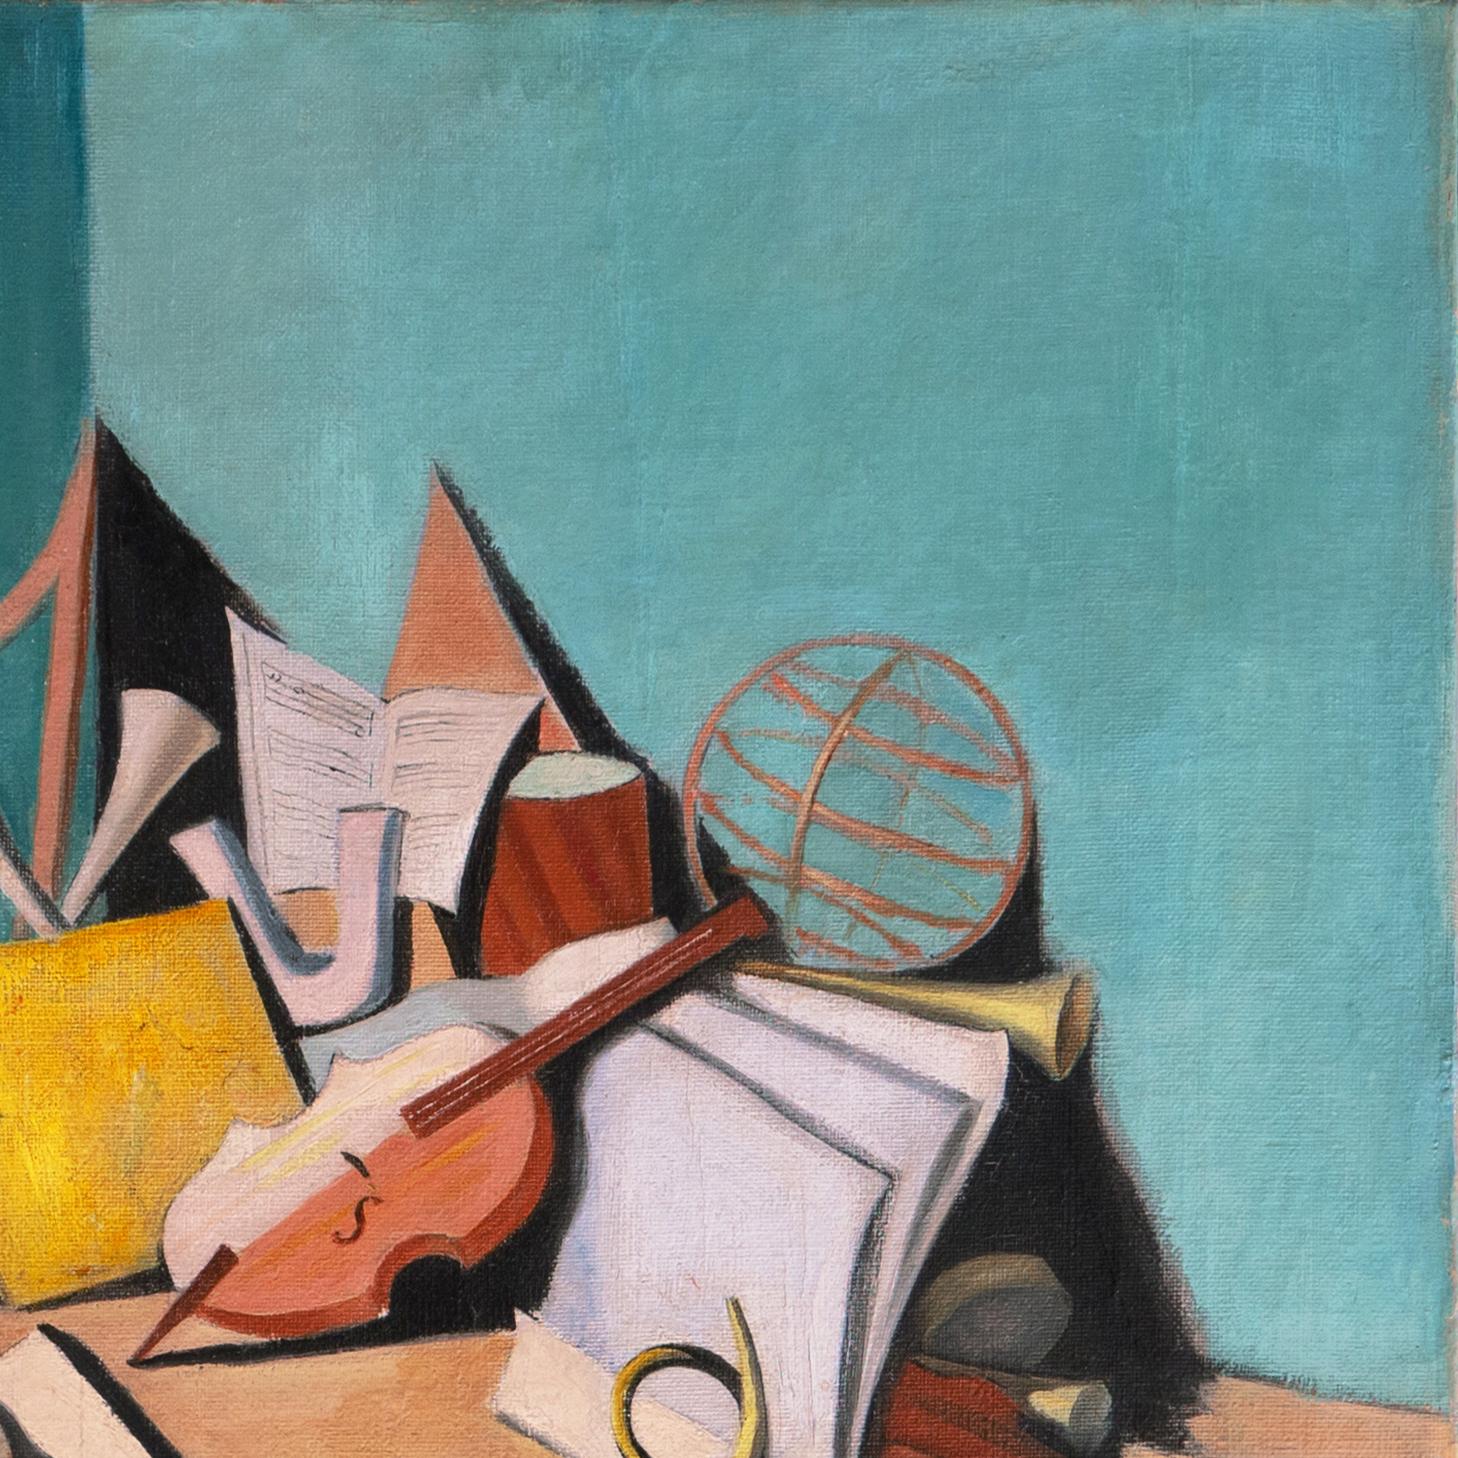 Signed lower right, 'Bertalan' for Albert Bertalan (Hungarian, 1899-1956) and dated 1929.
Displayed in a period, birds-eye maple frame; frame size: 26 x 30 inches

An elegant, oil still-life by this early European modernist who exhibited widely and